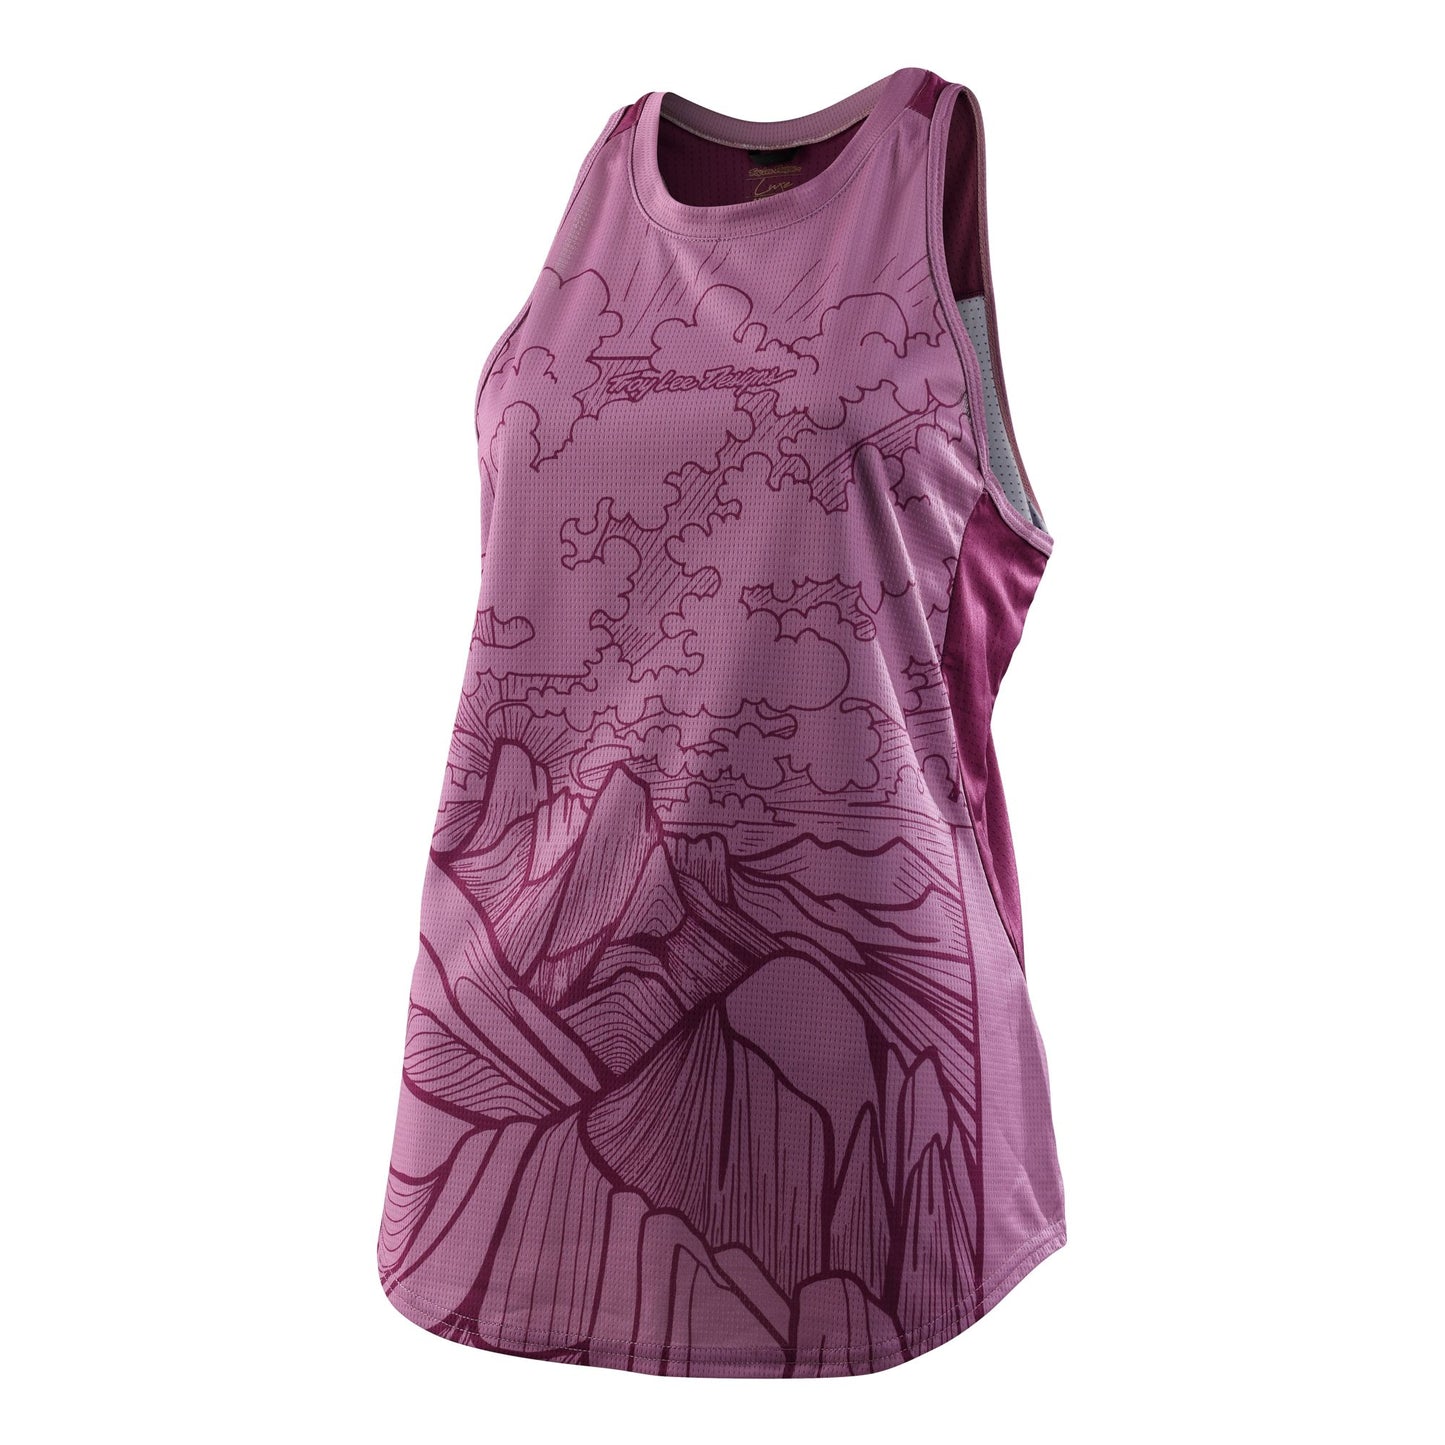 Troy Lee Designs Women's Luxe Tank Micayla Gatto Rosewood Shirts